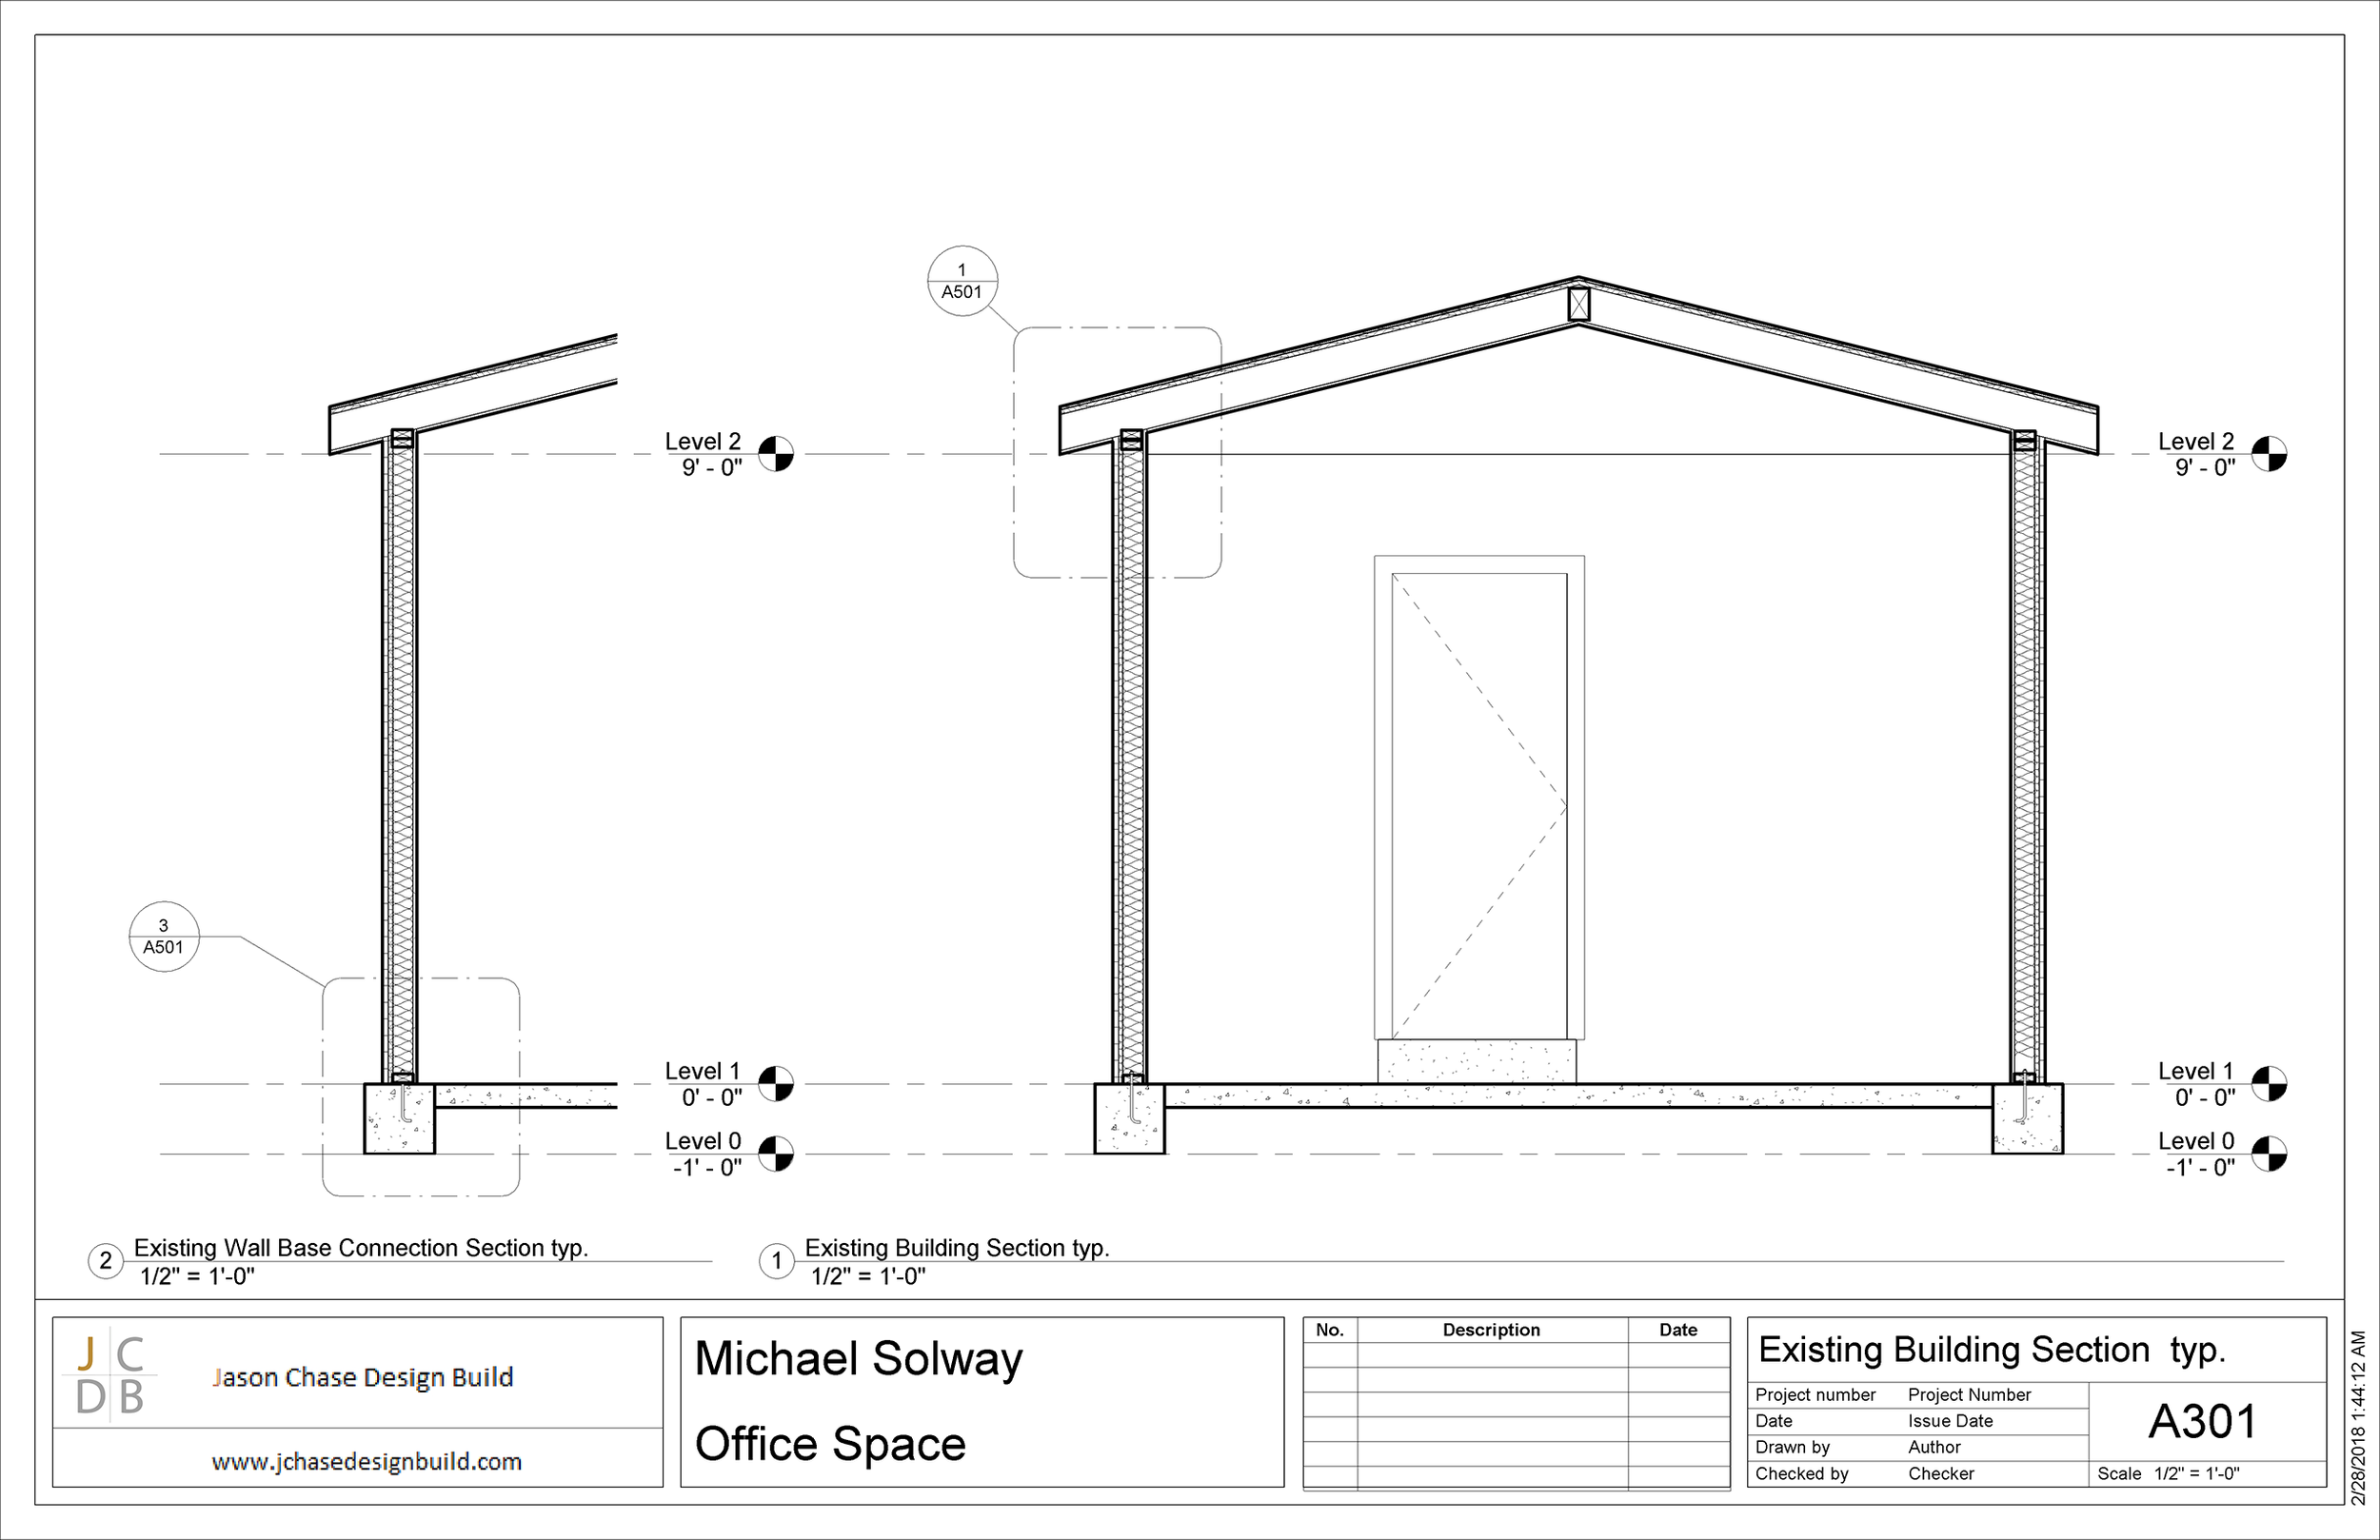 Kimmel Sheets - Sheet - A301 - Existing Building Section  typ-.png